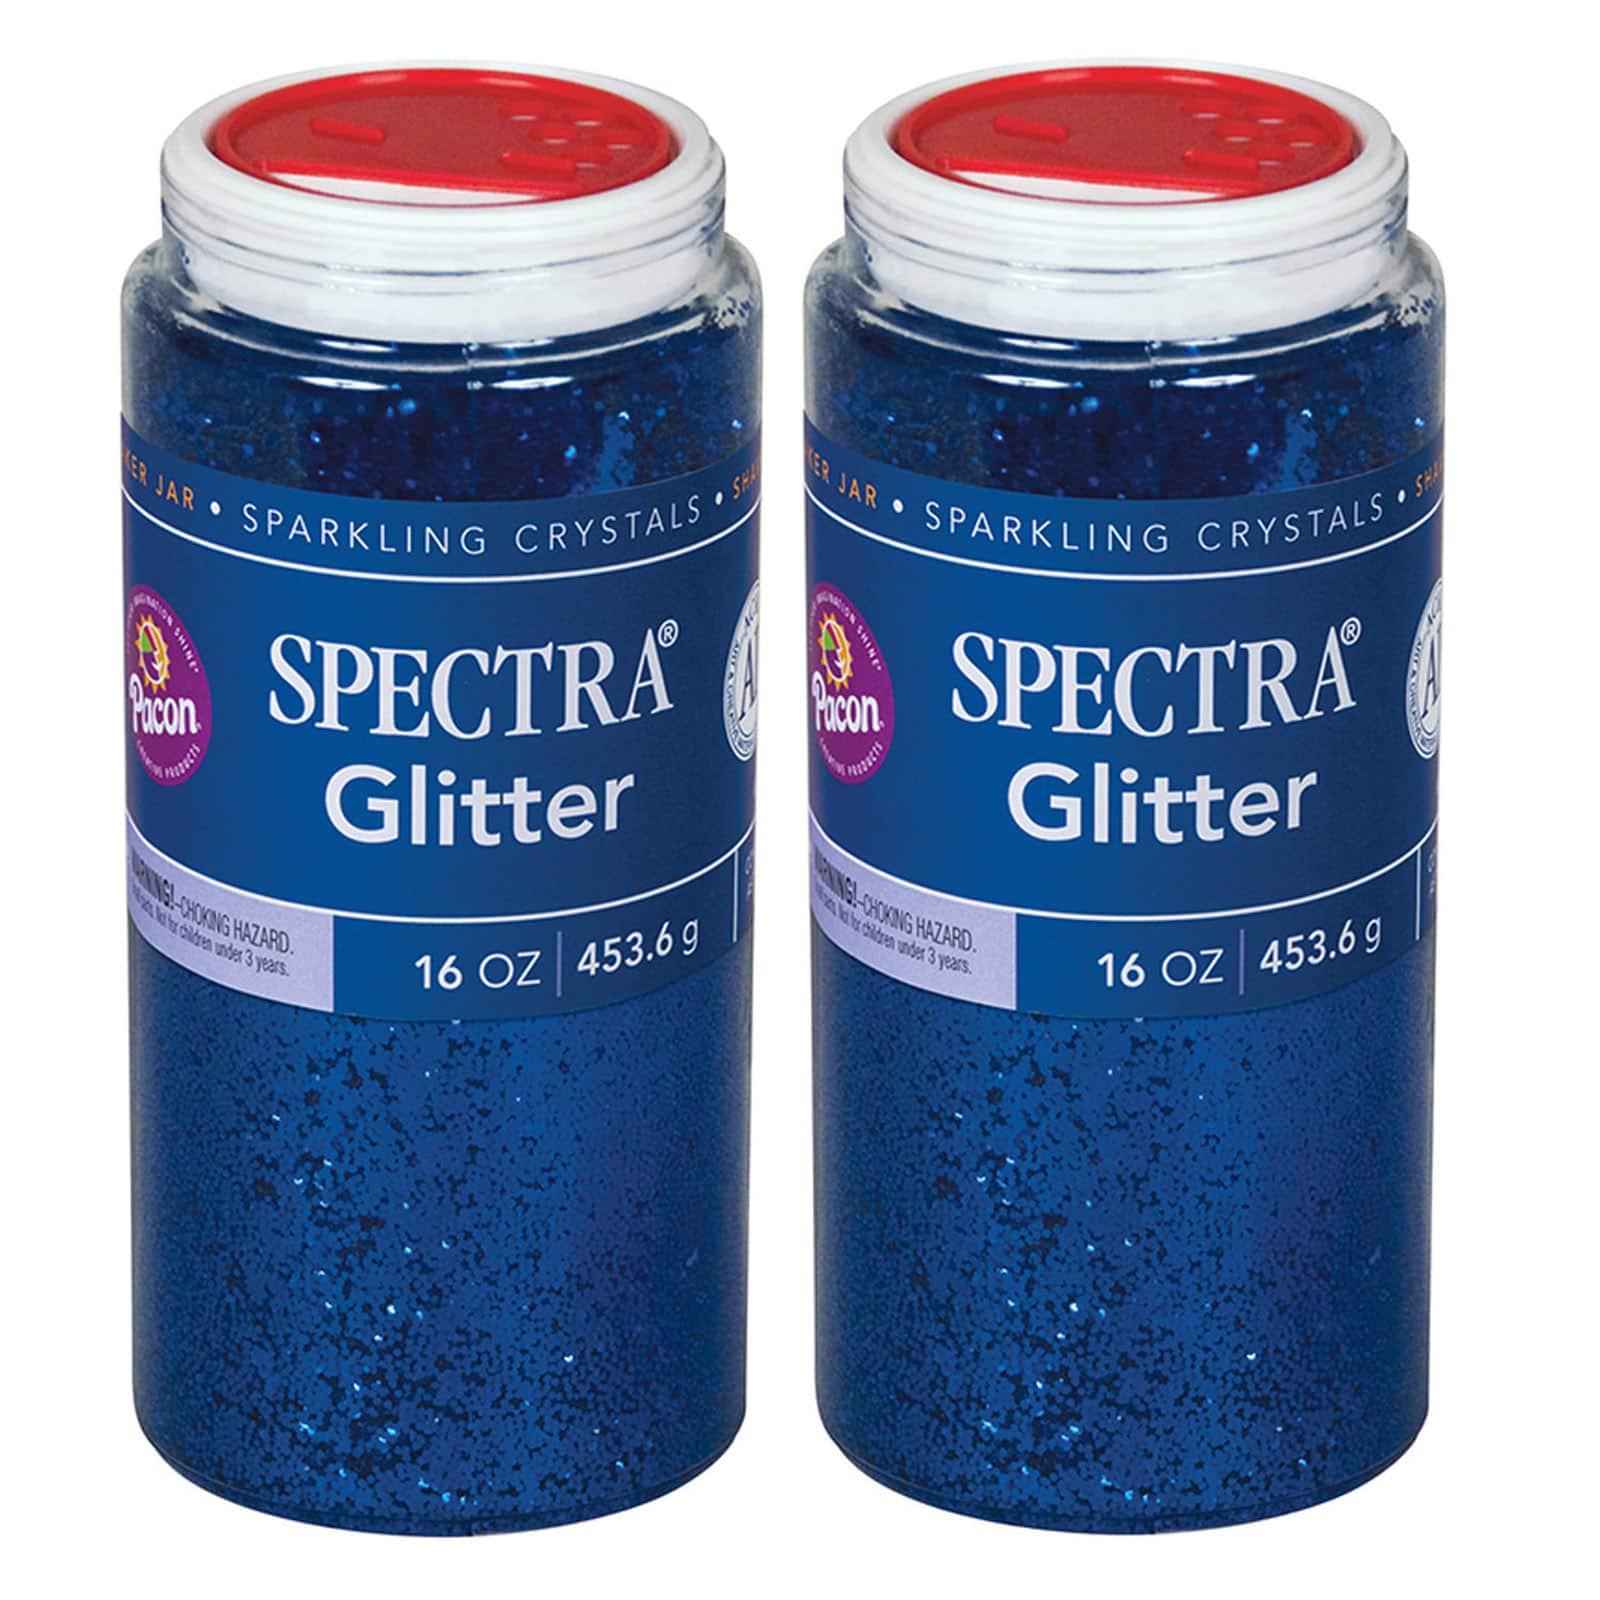 Pacon&#xAE; Spectra&#xAE; Glitter Sparkling Crystals, 2ct.